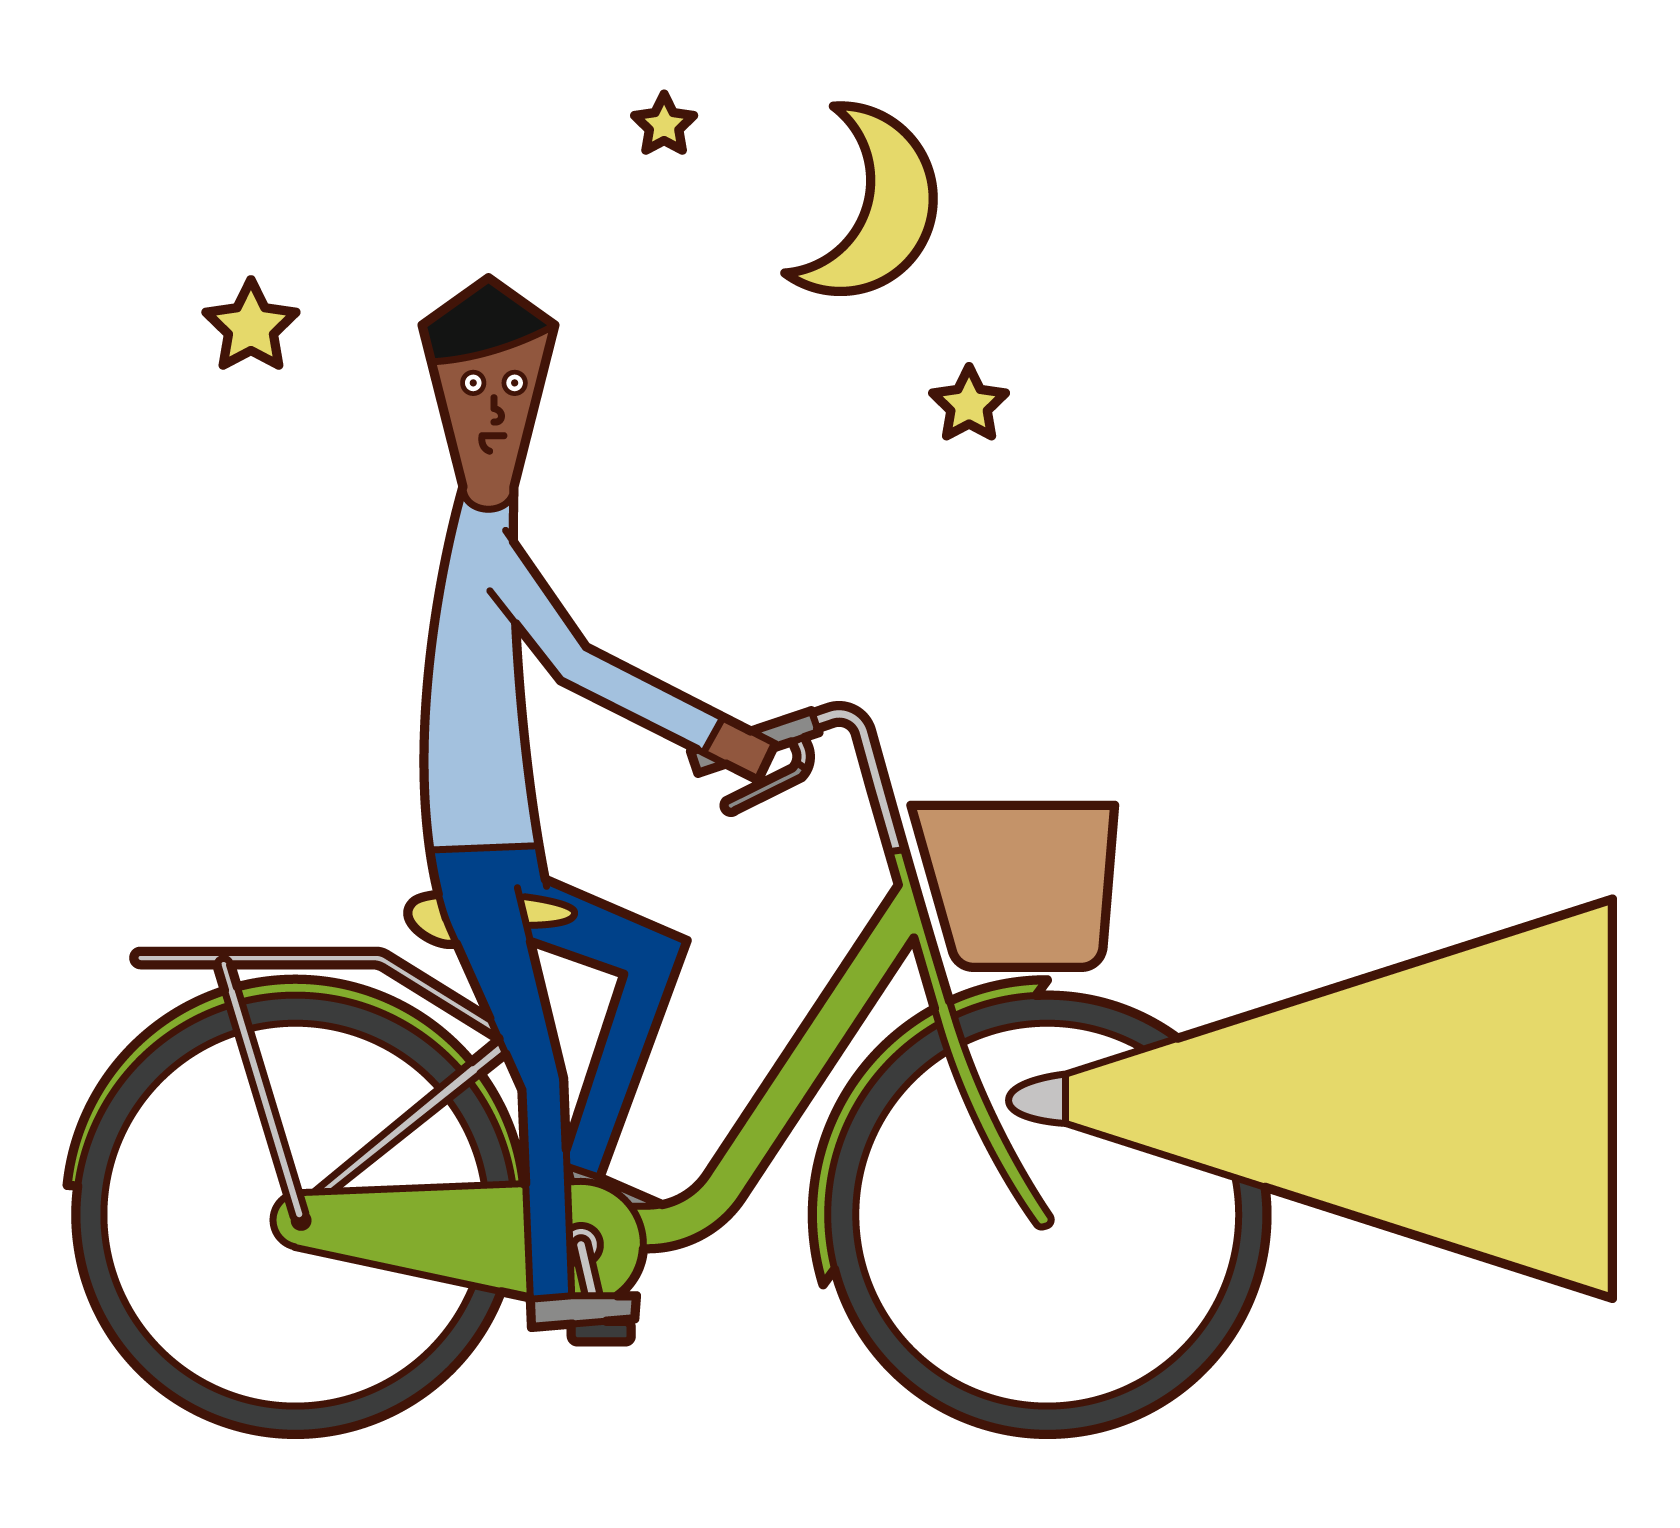 Illustration of a man driving a bicycle on a light at night